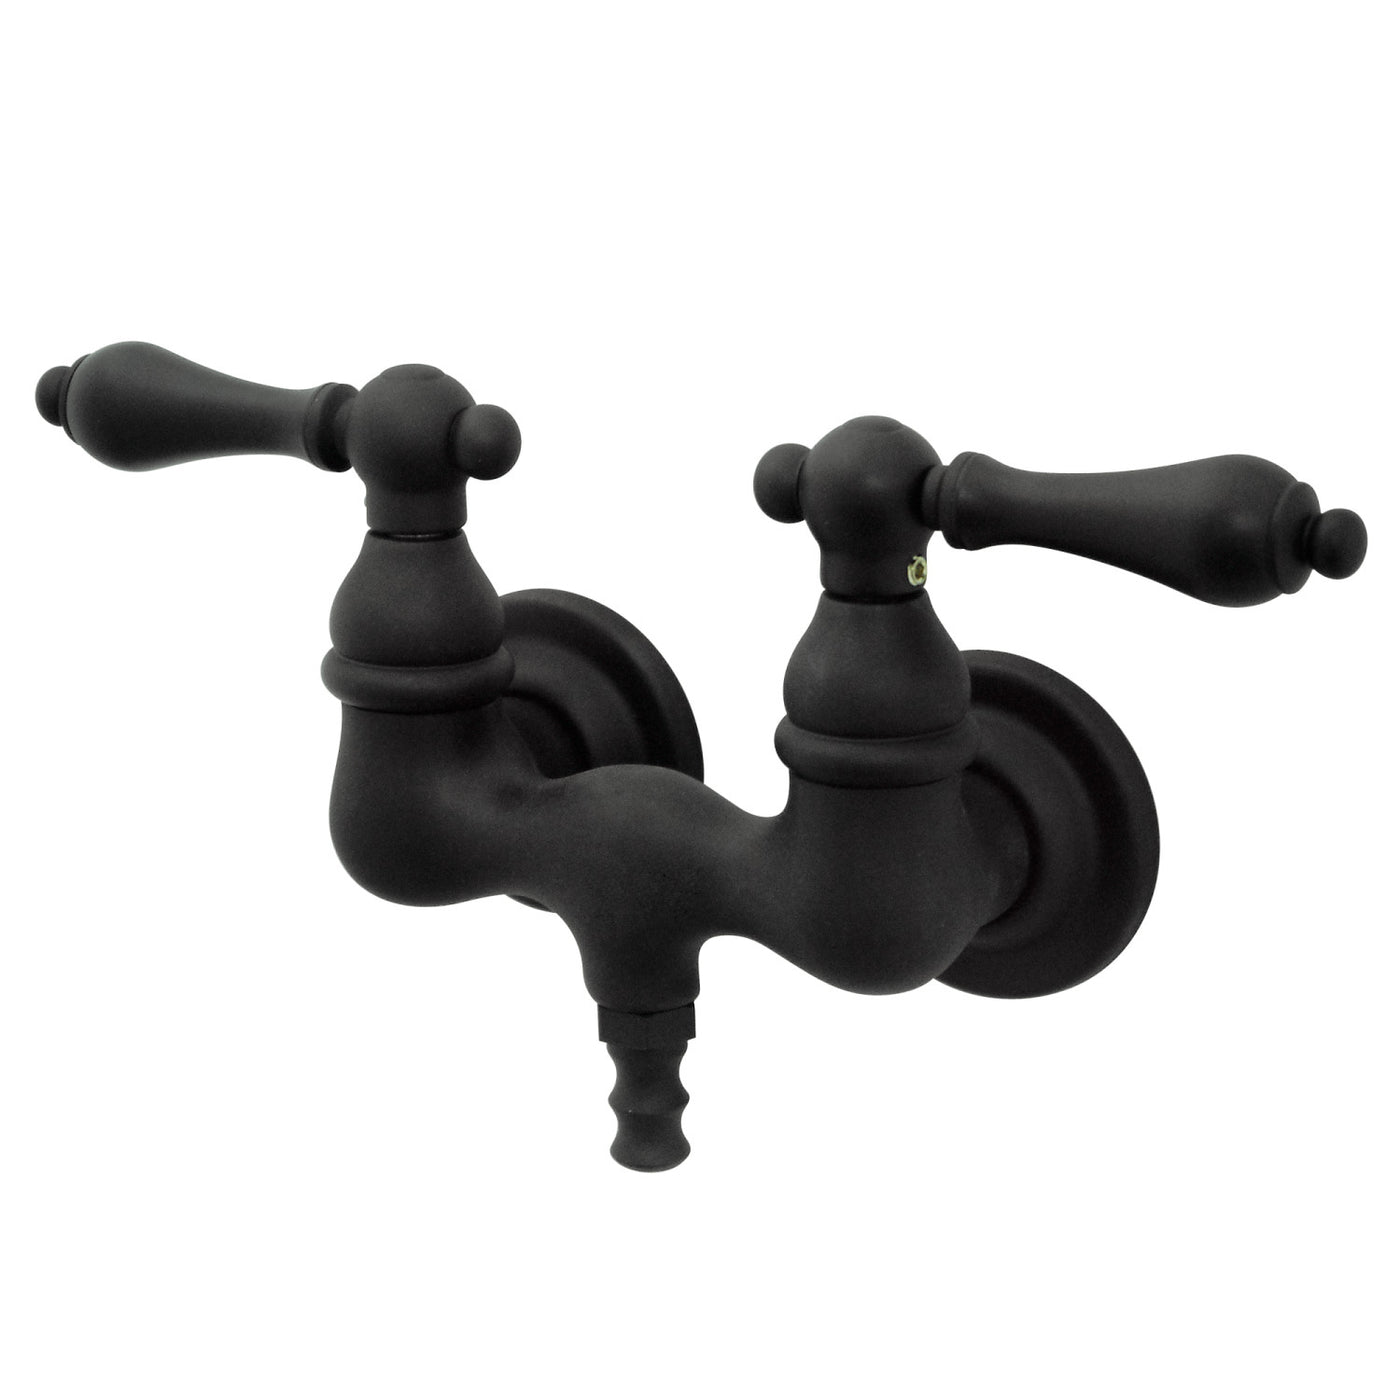 Elements of Design DT0315AL 3-3/8-Inch Wall Mount Tub Faucet, Oil Rubbed Bronze